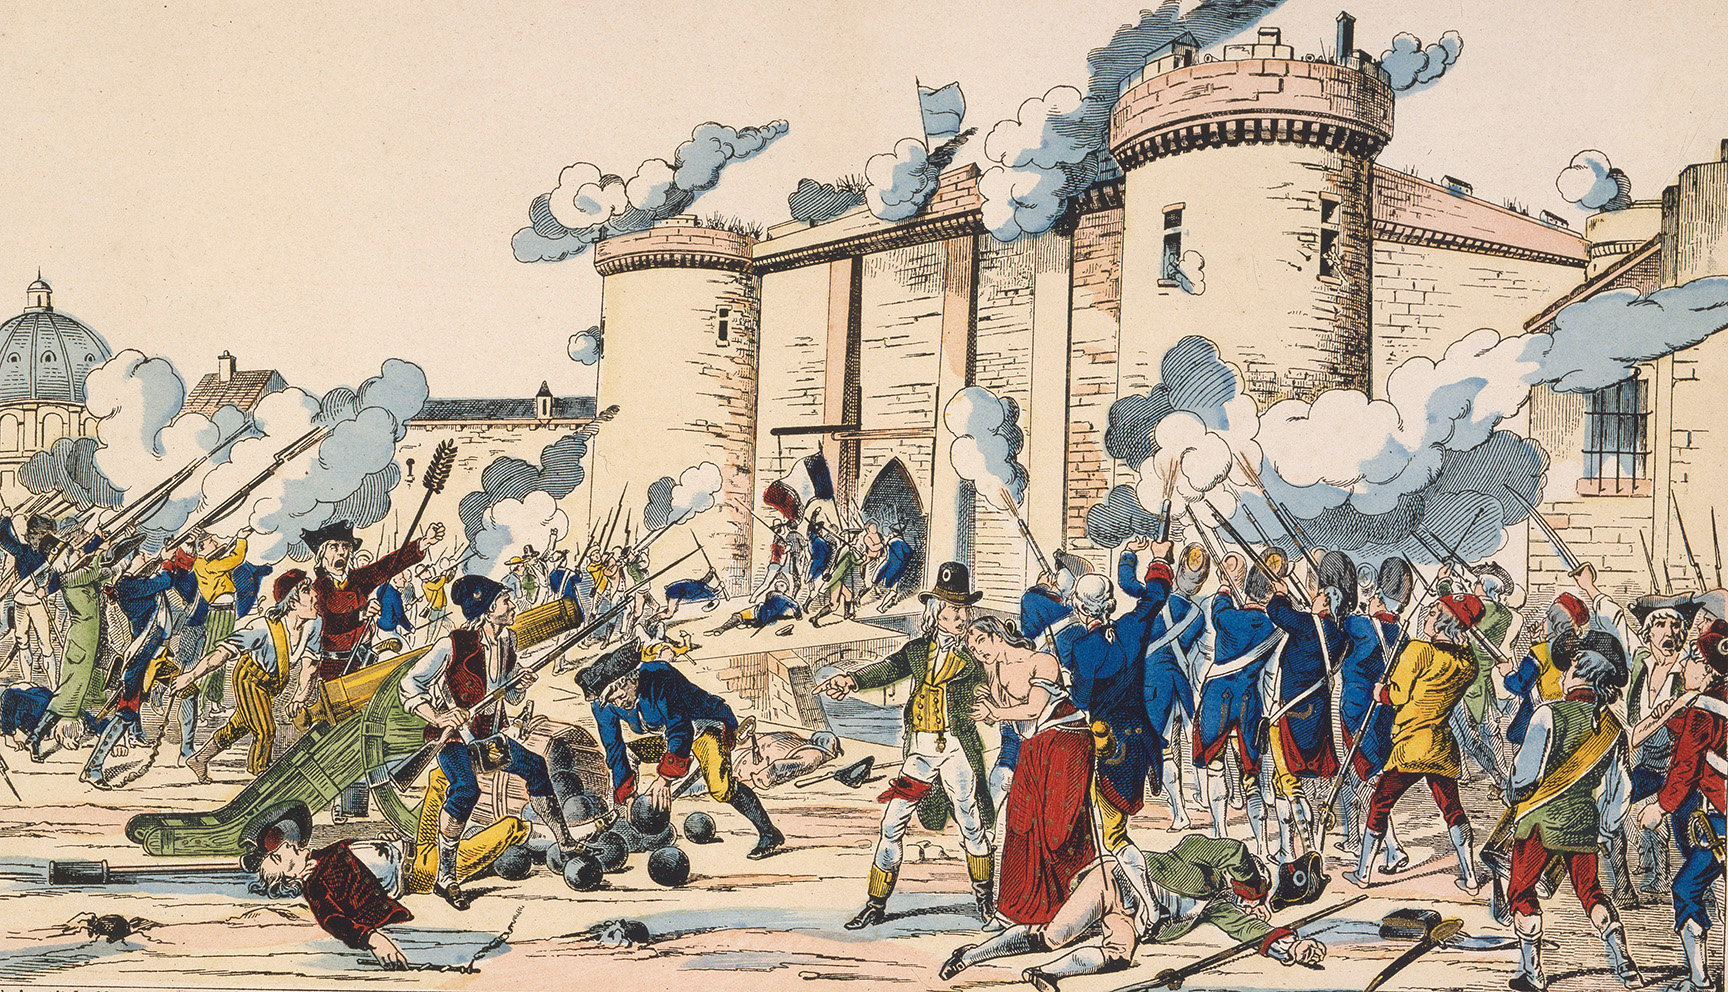 Storming of the Bastille on 14 July 1789 (lithograph, circa 1840)